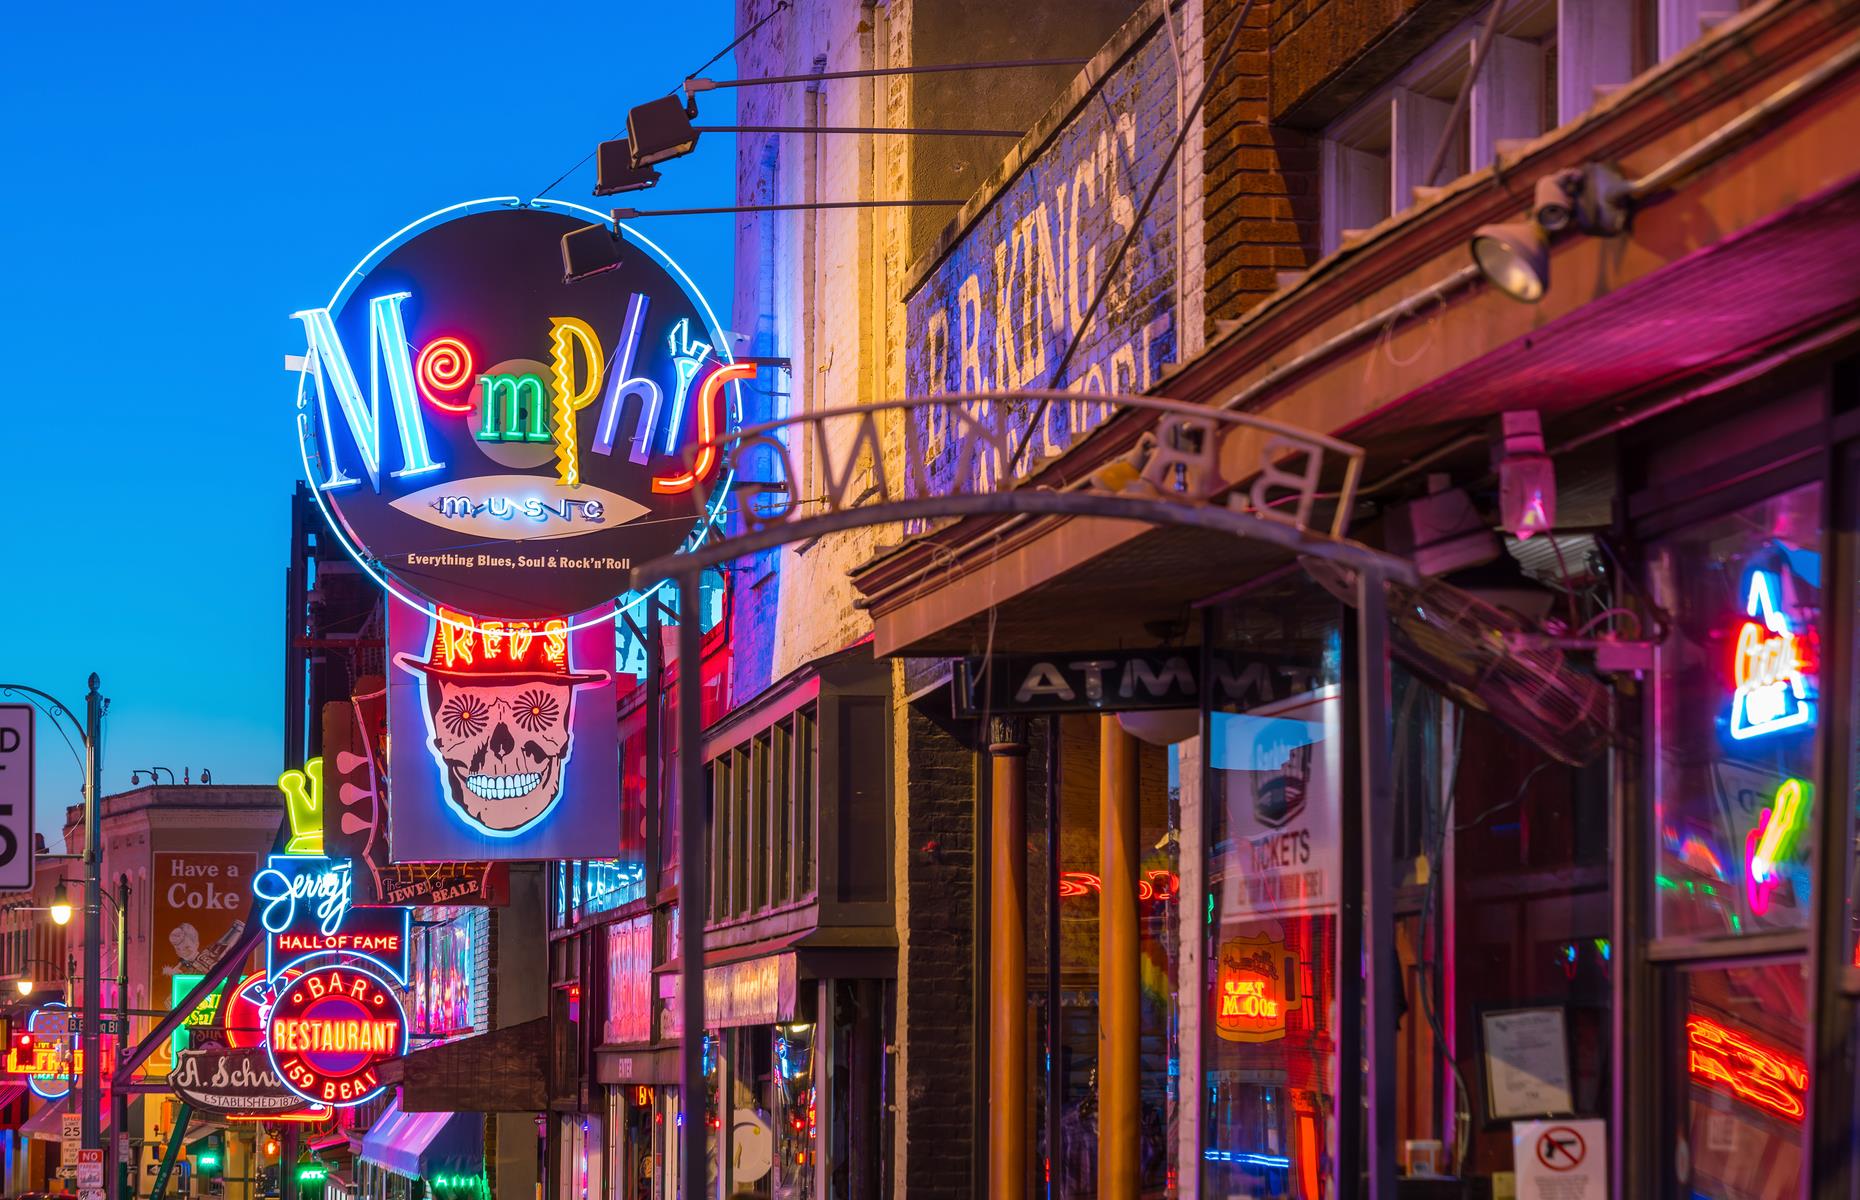 <p>This is the ultimate escape for music lovers – or anyone who likes their road trips to come with equal doses of culture and fun. Memphis is home to <a href="http://www.bealestreet.com/">Beale Street</a> – with its fizzing neon signs, blues bars, BBQ joints and record stores – and <a href="https://www.graceland.com/">Graceland</a>, former house of the King of Rock 'n' Roll. Elvis’ mansion lives up to the hype thanks to a stylish tour that takes visitors past the Jungle Room and to the singer’s grave. Guests are asked to <a href="https://www.graceland.com/covid">check Graceland's safety protocols</a> before visiting. </p>